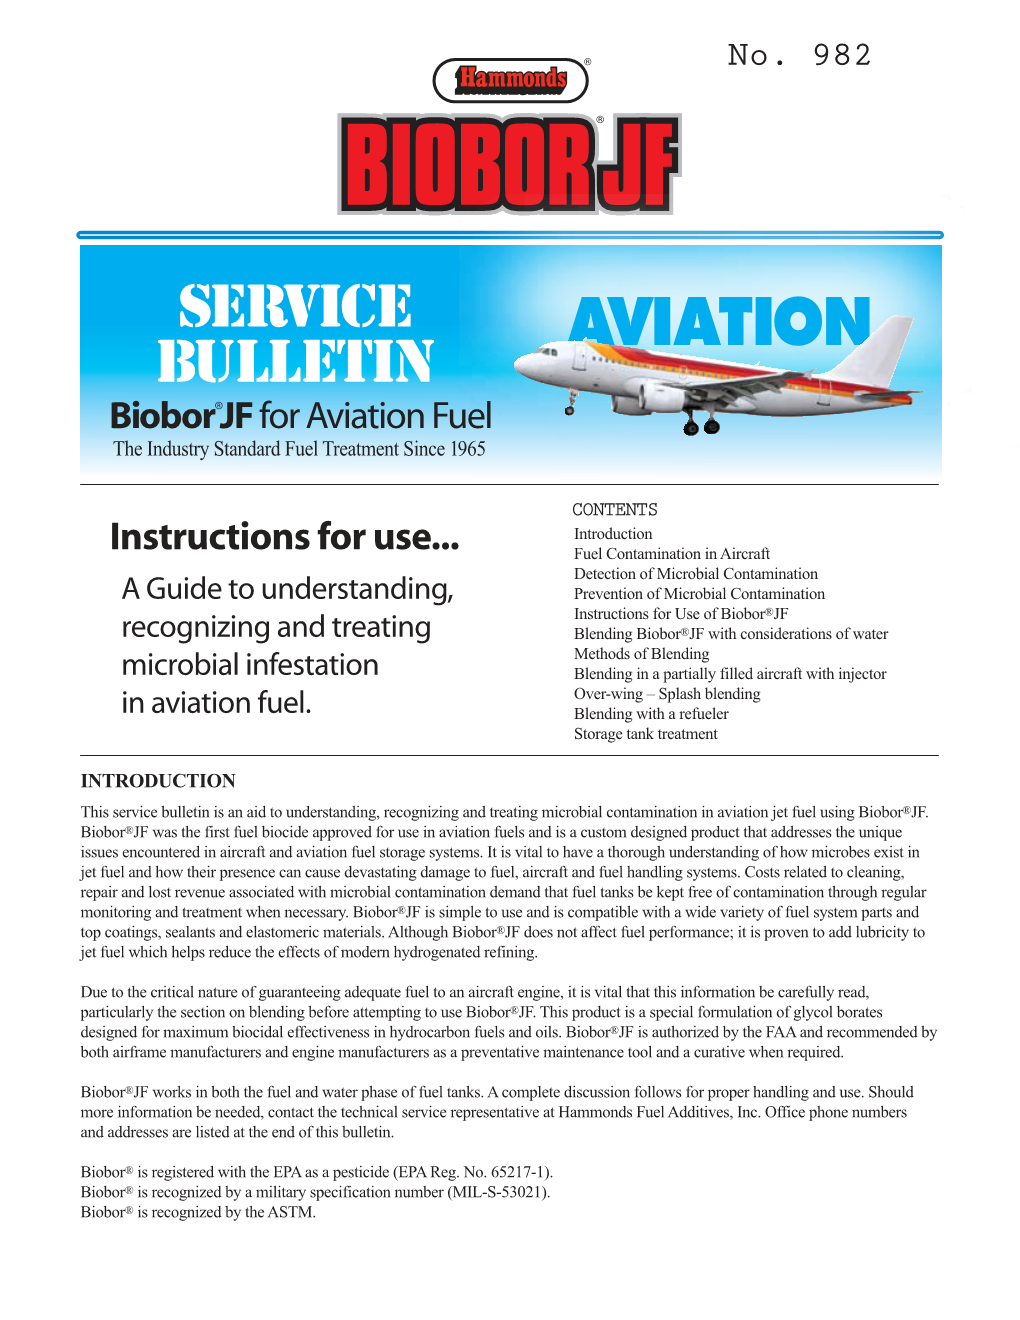 Service Bulletin Is an Aid to Understanding, Recognizing and Treating Microbial Contamination in Aviation Jet Fuel Using Biobor®JF